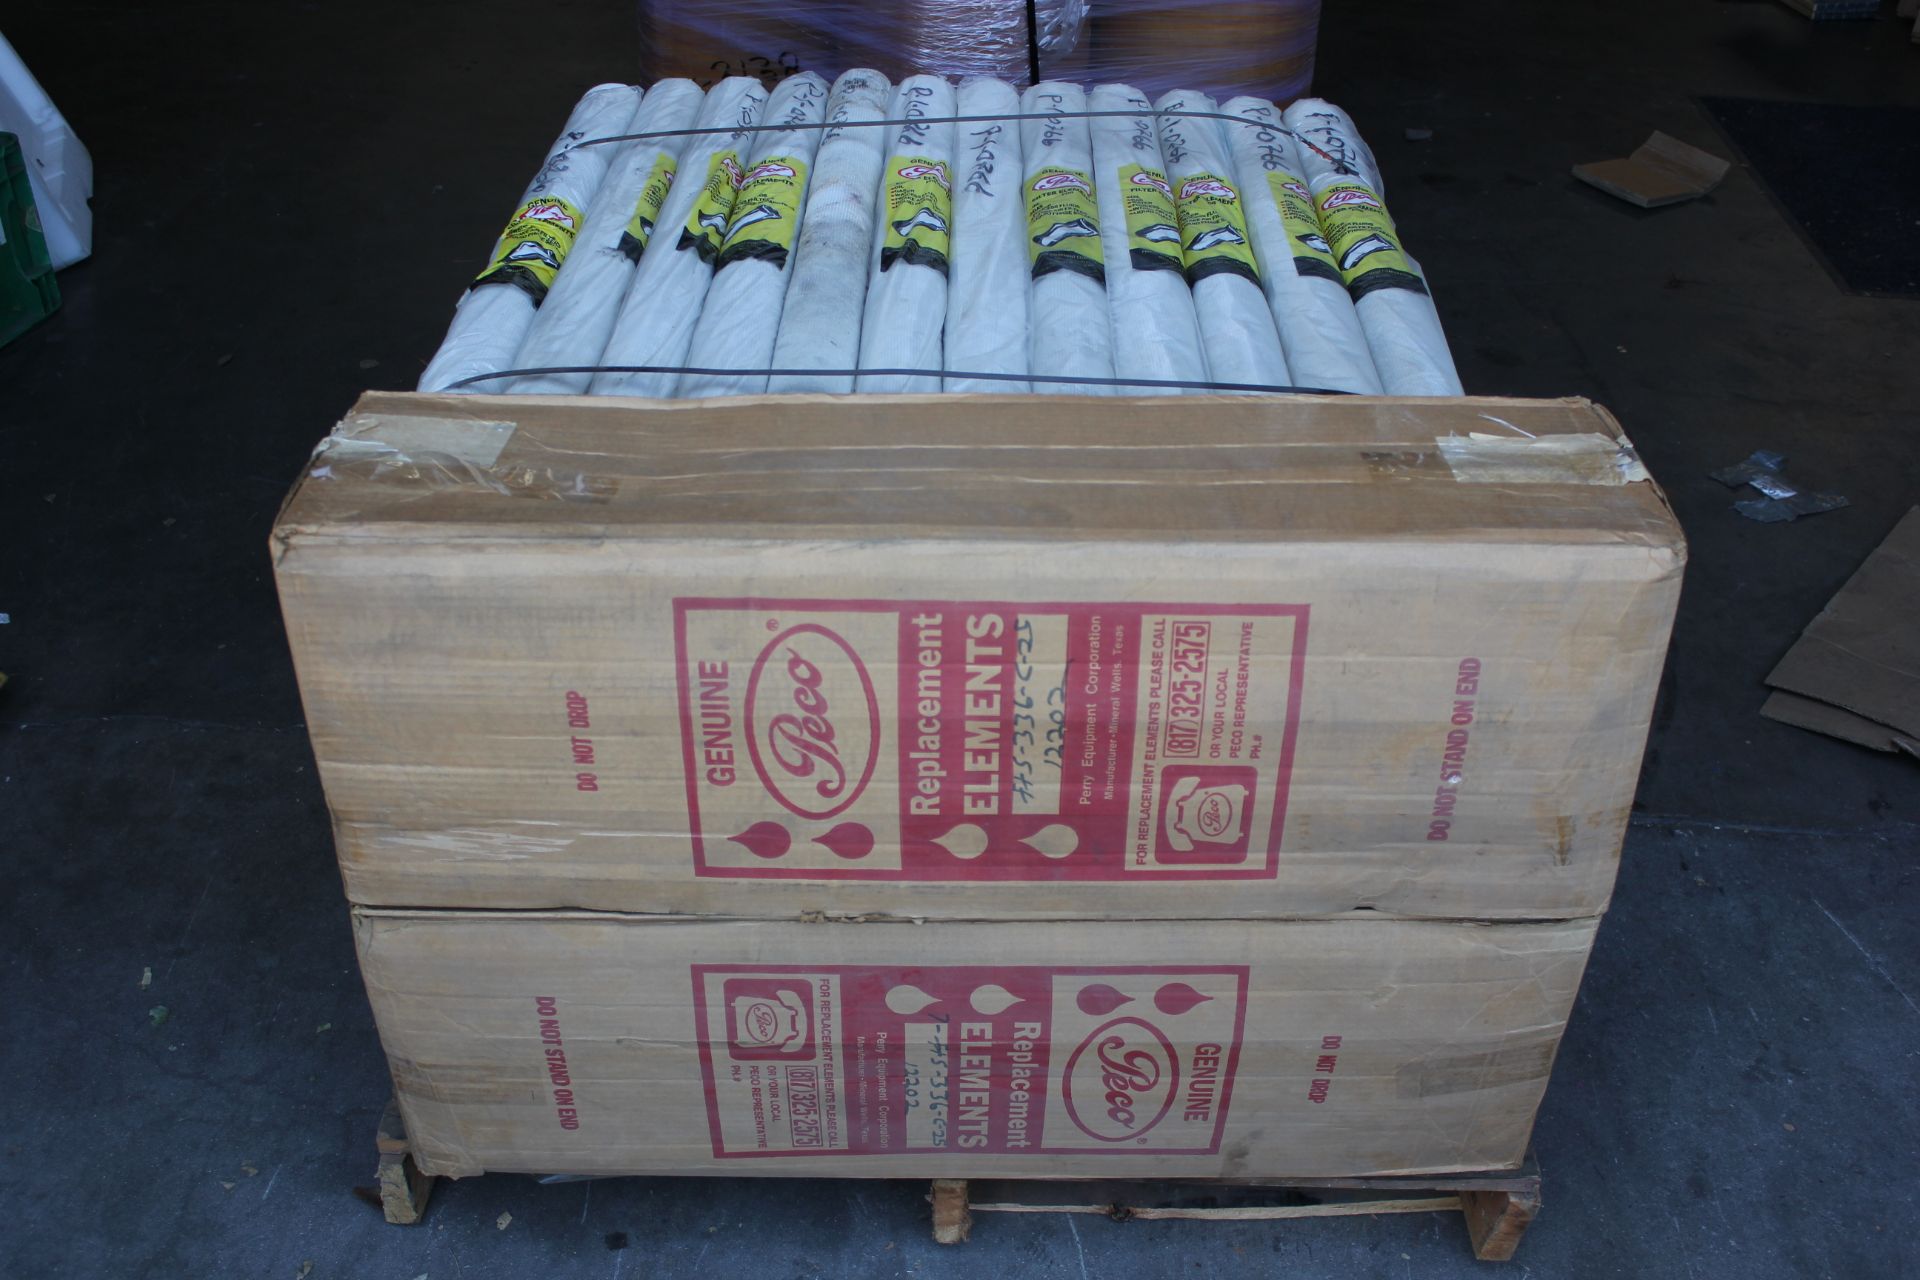 1 PALLET OF NEW PECO FILTER ELEMENTS